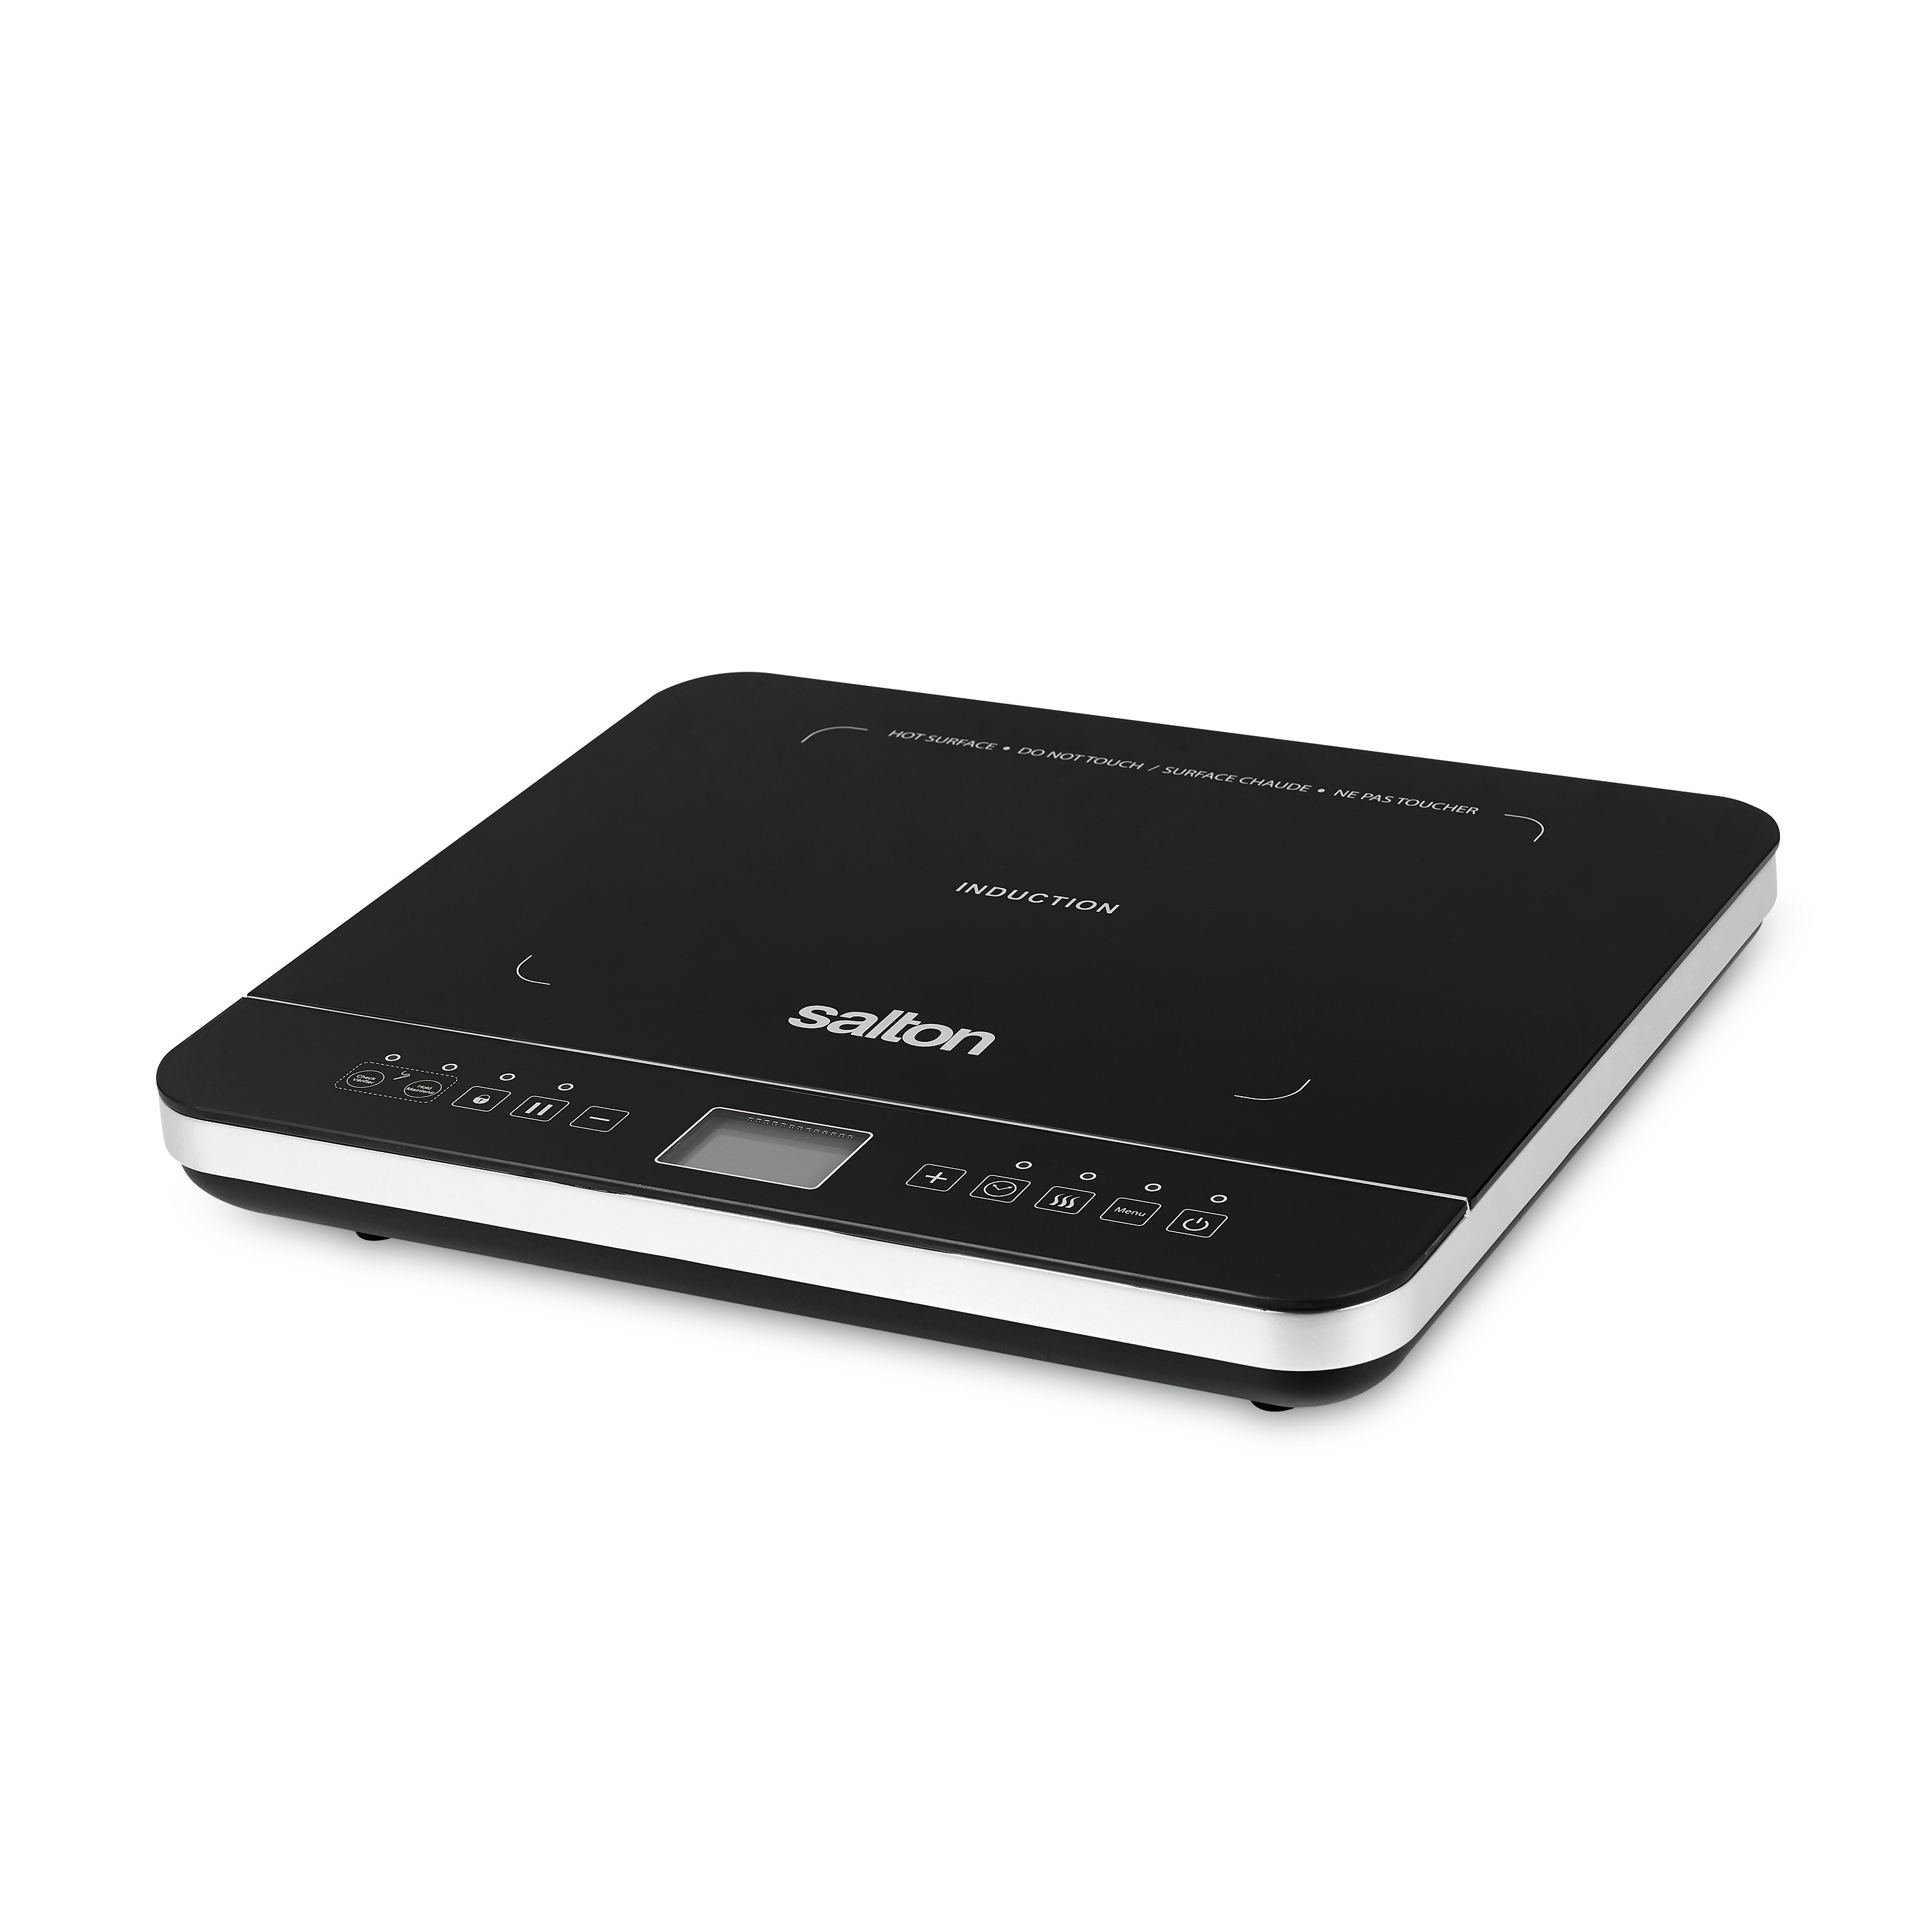 Cuisinart Double Induction Hot Plate